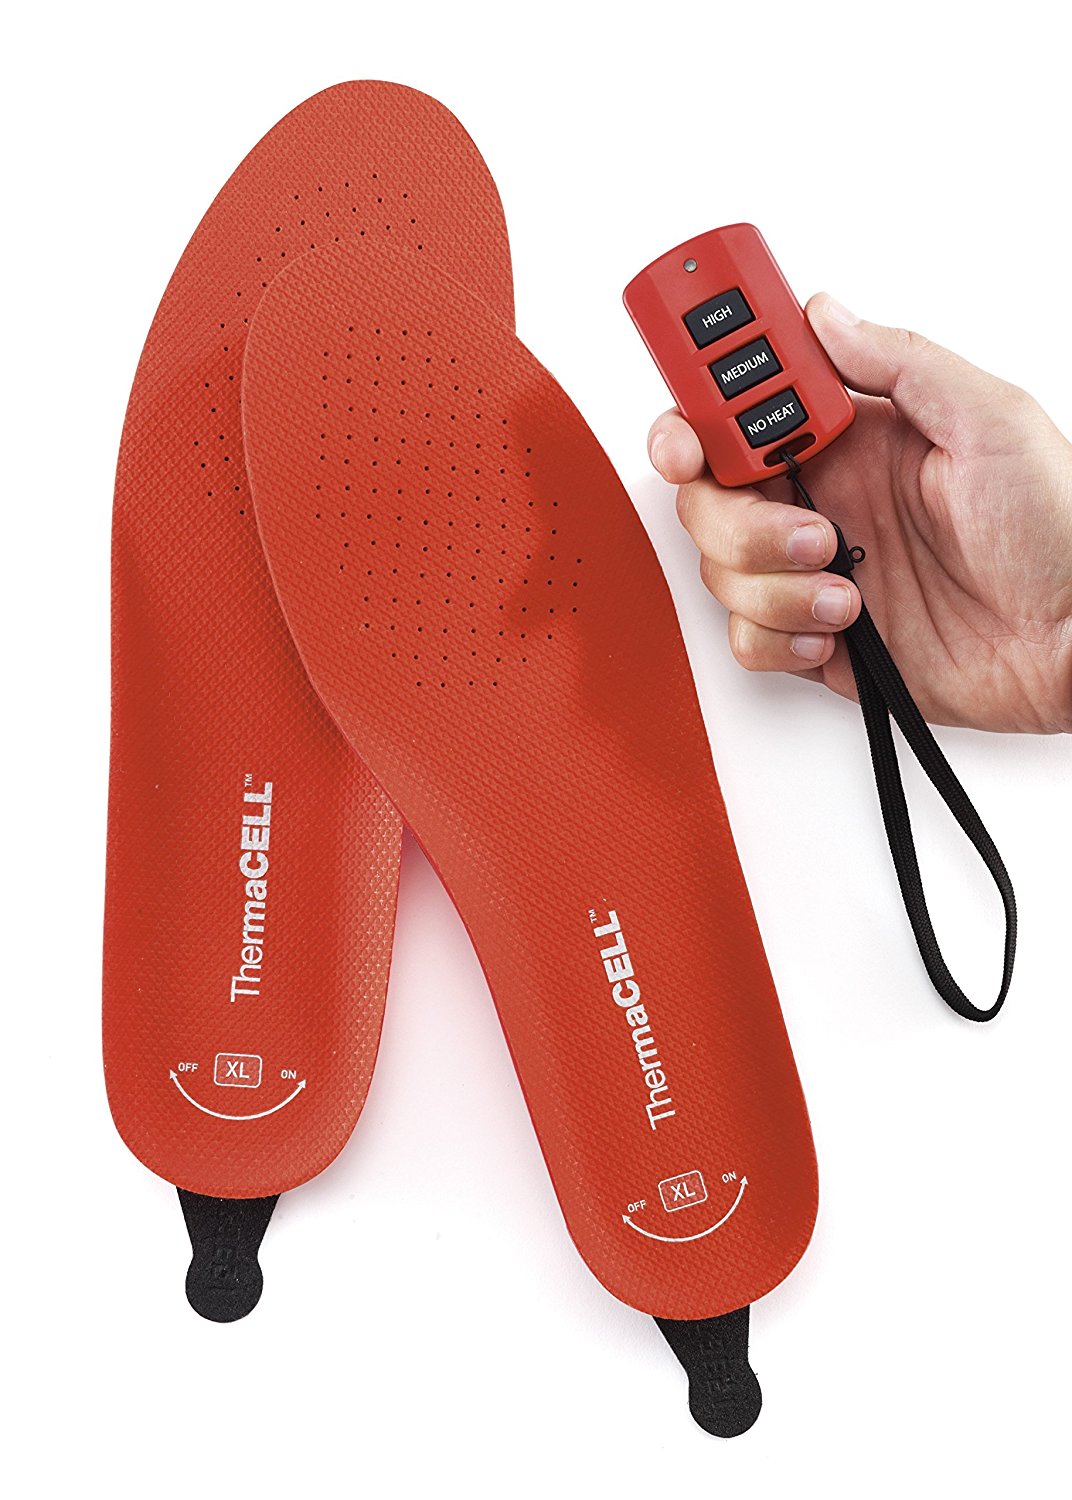 Heated Insoles Wireless Remote Thermacells Controlled Large Rechargeable Battery 